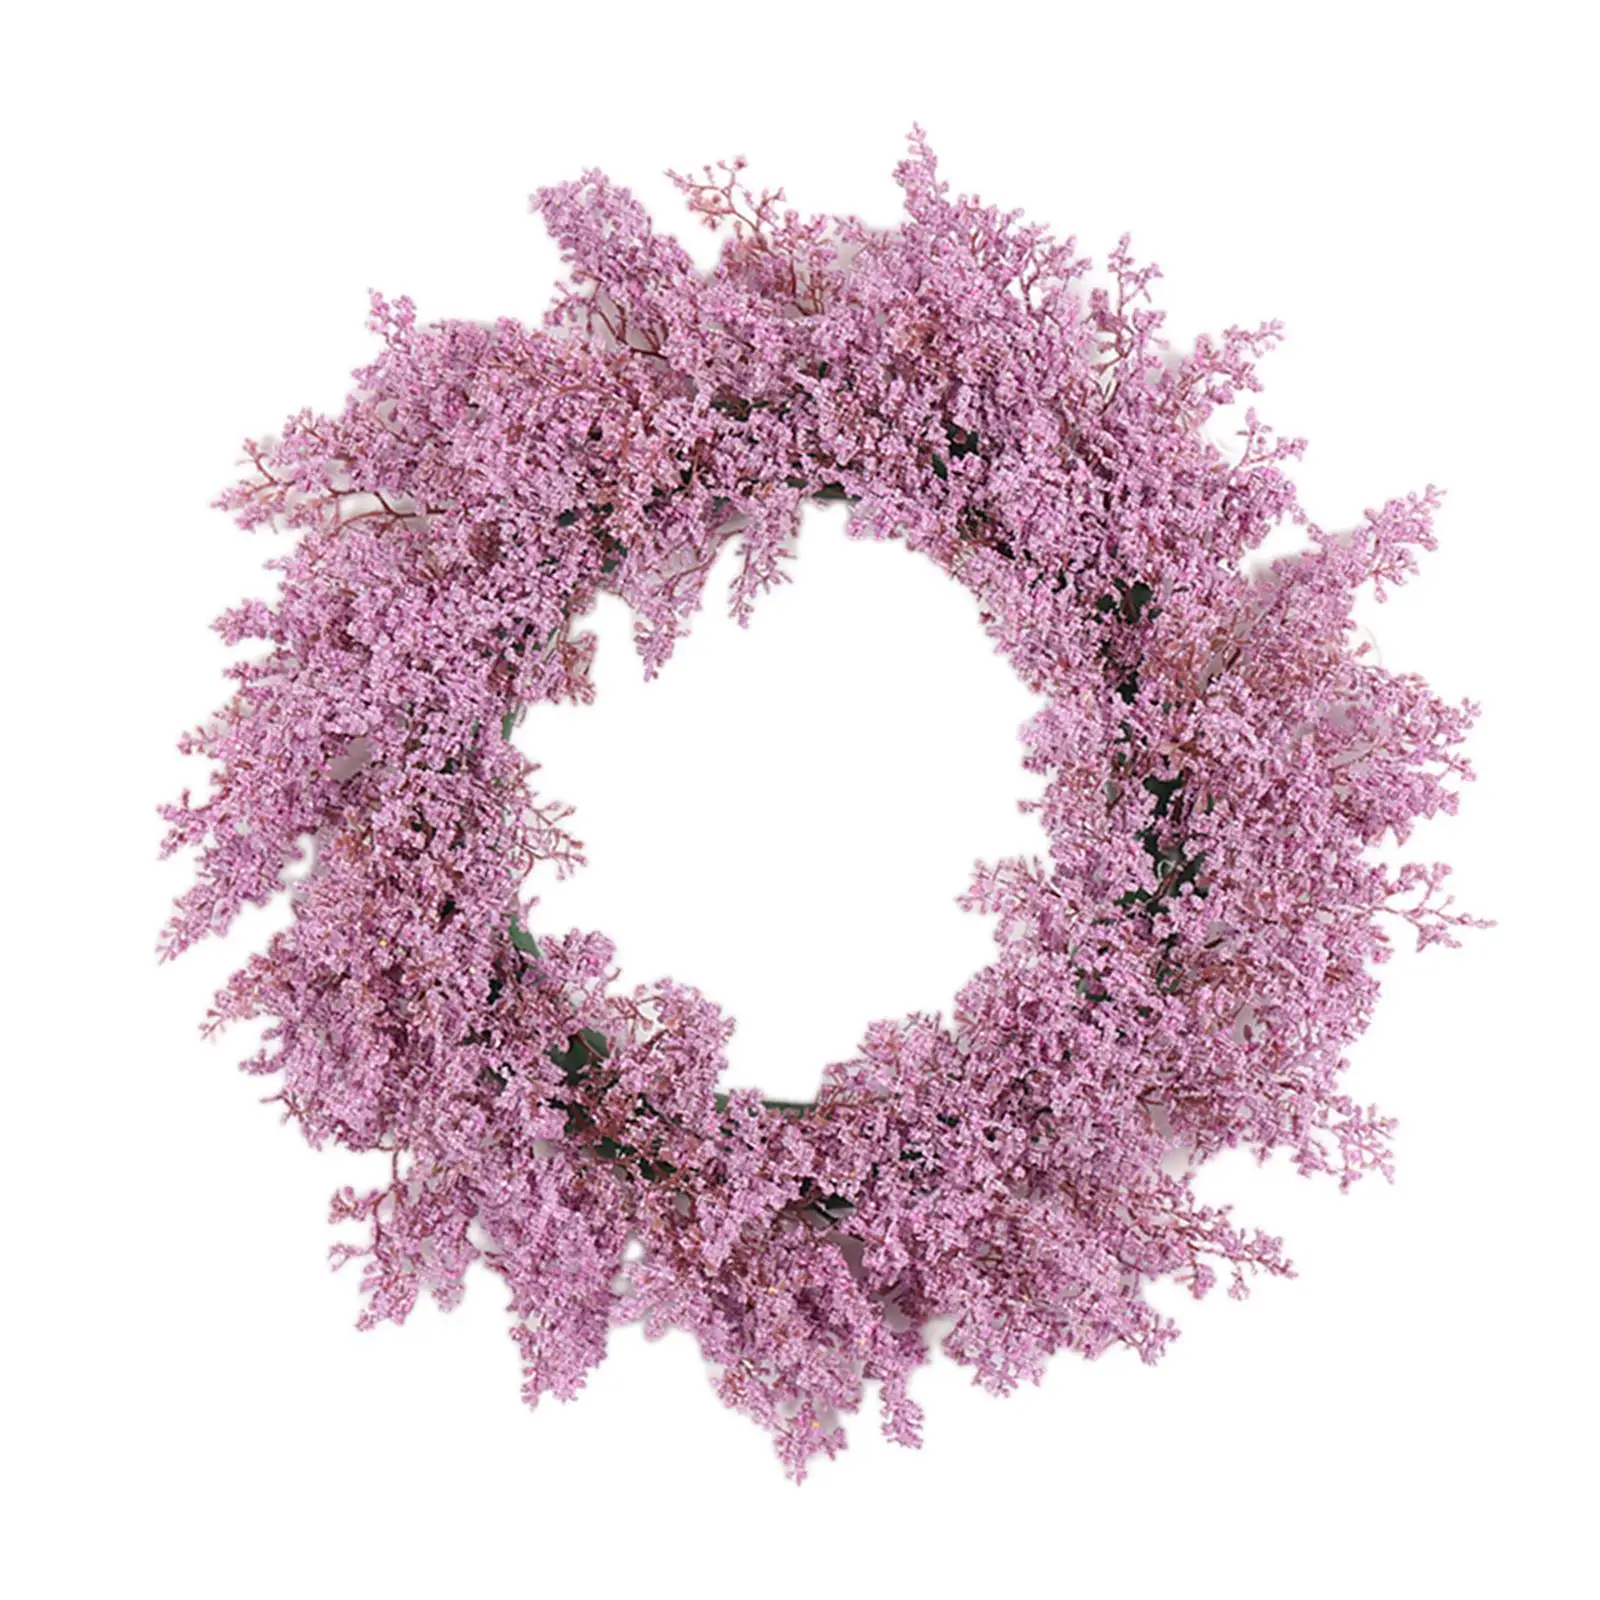 Artificial Flocked Flowers Wreath Floral Wreaths for Holiday Spring Summer Farmhouse Decoration